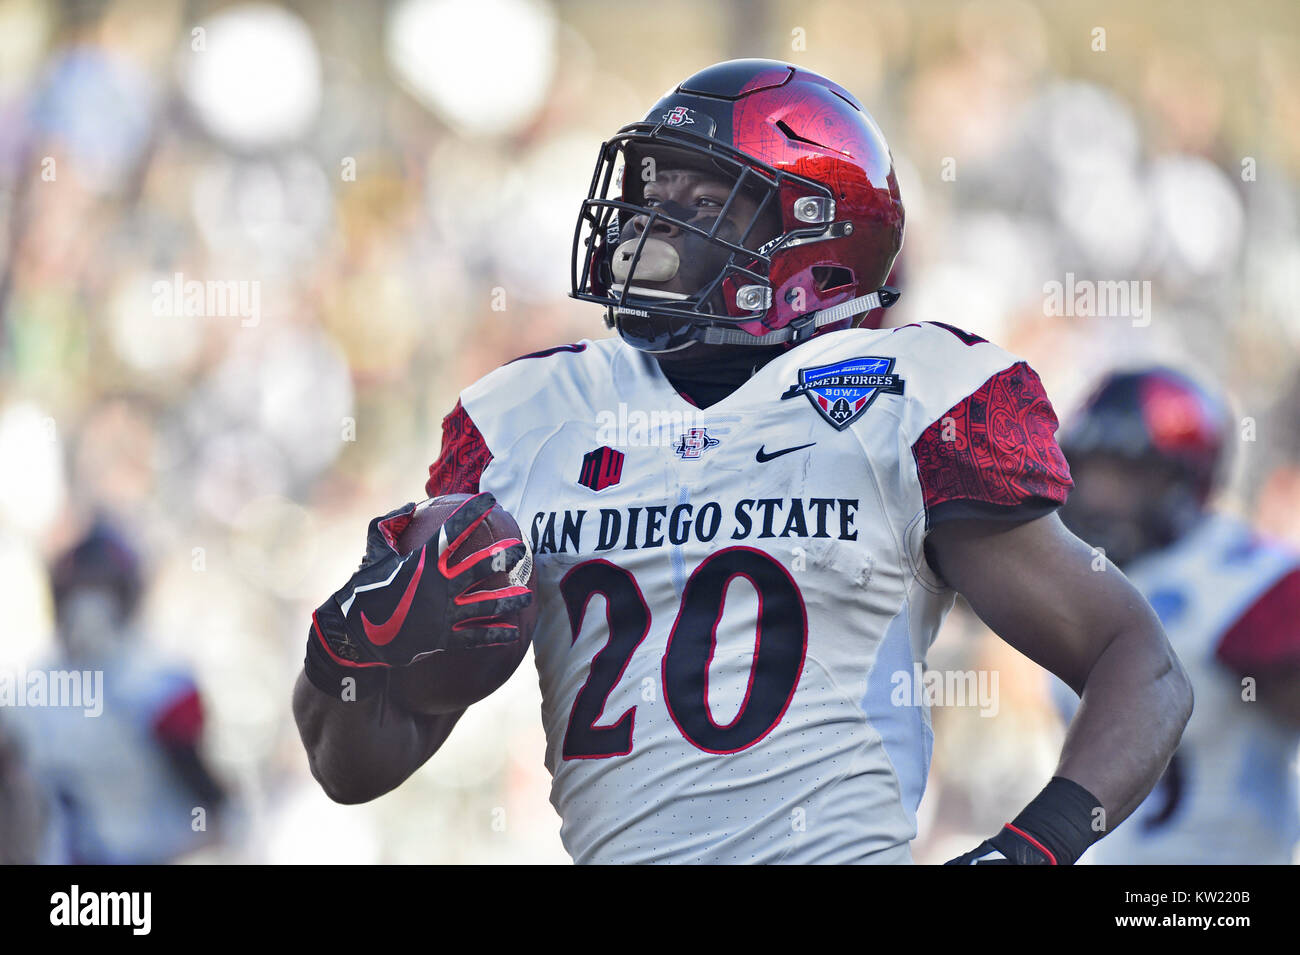 December 23, 2017 - San Diego State running back Rashaad Penny runs towards the end zone for a first quarter touchdown during a NCAA college football game in the Lockheed Martin Armed Forces Bowl against Army at Amon G. Carter Stadium in Fort Worth, Texas. Army won 42-35. Austin McAfee/CSM Stock Photo